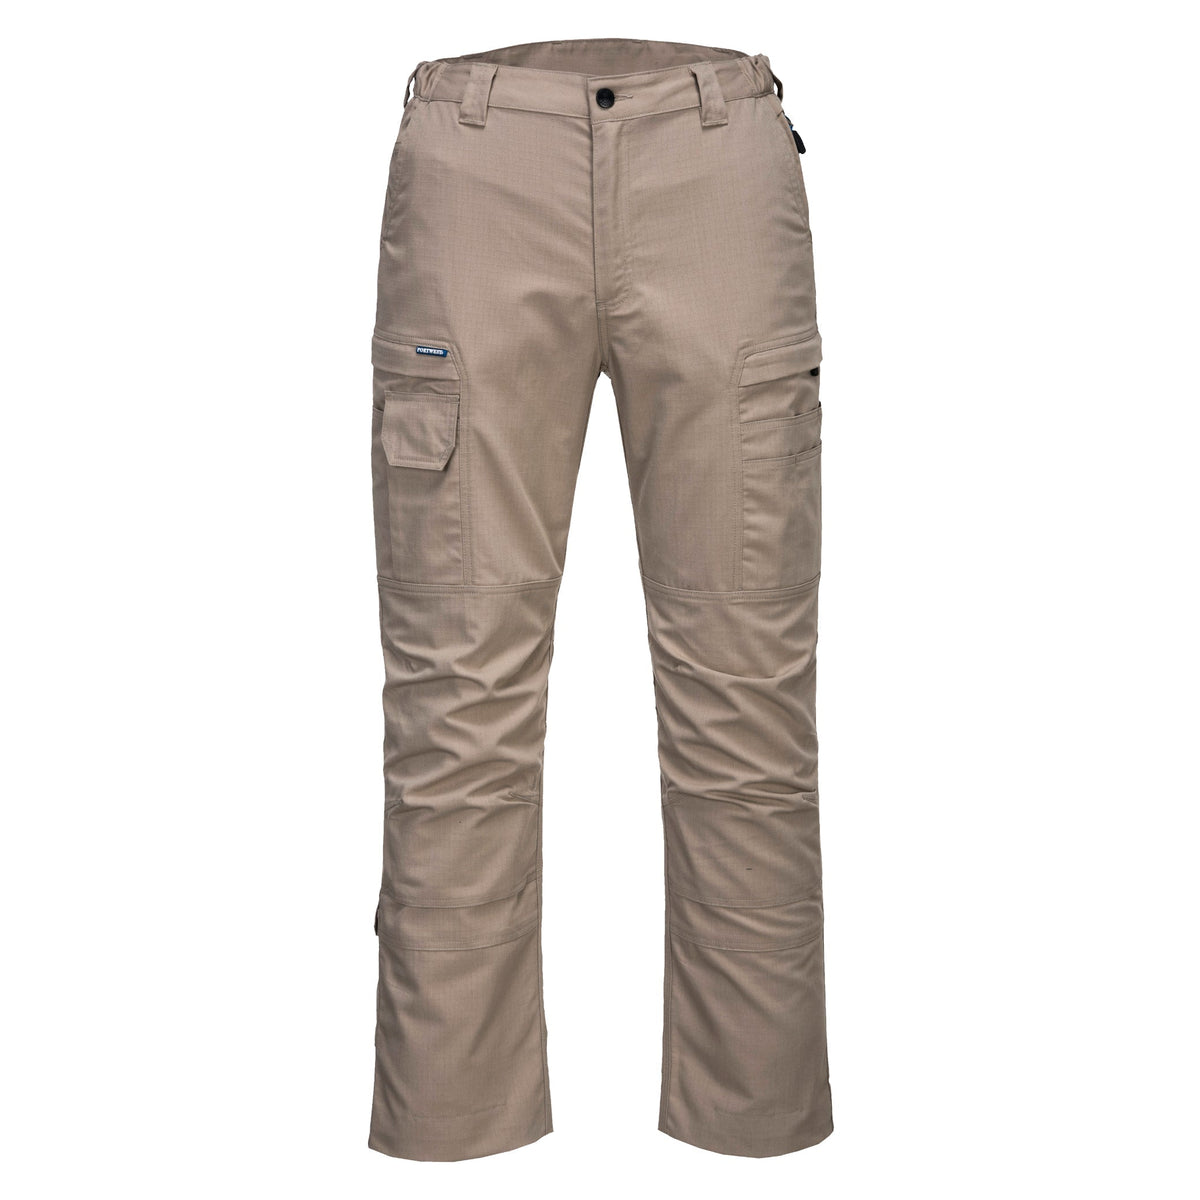 PORTWEST Ripstop Slim Fit Stretch Pants - T802 — Safety Vests and More